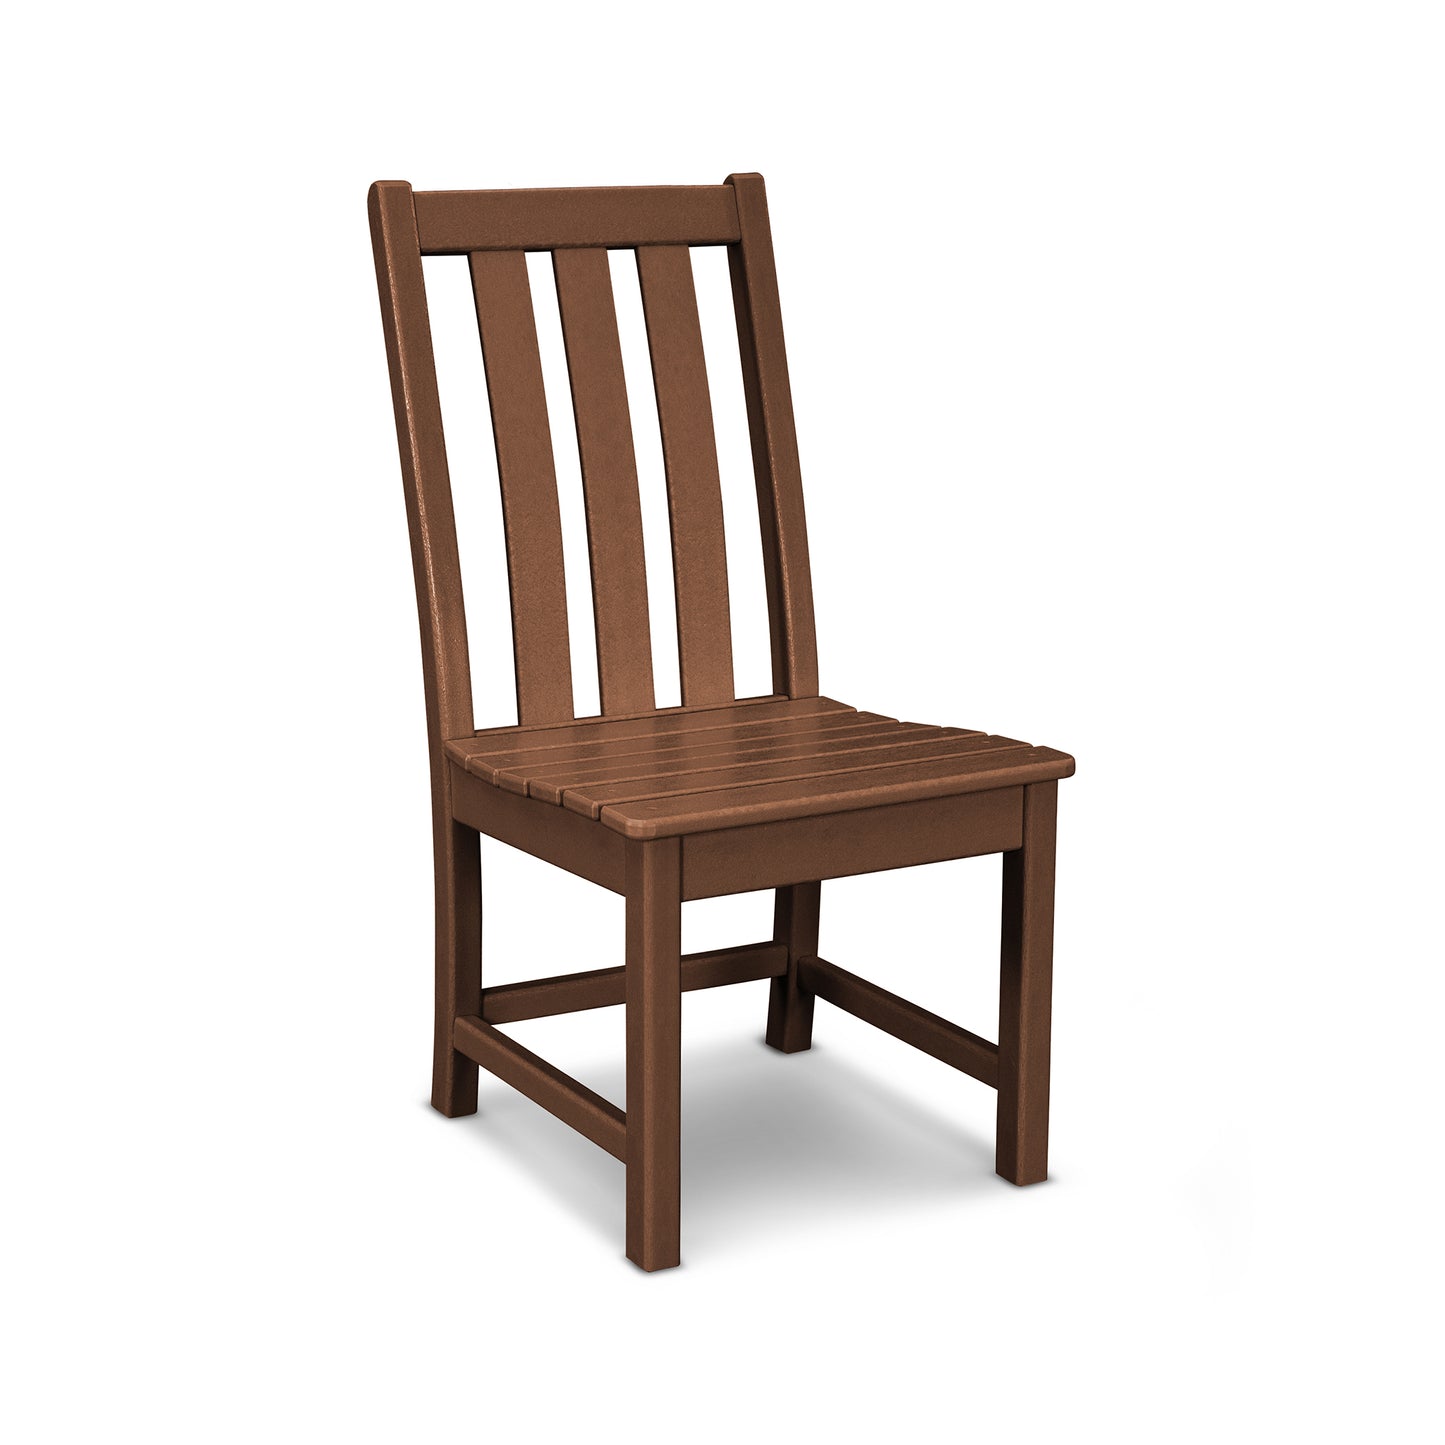 A simple brown wooden chair, designed as a POLYWOOD Vineyard Dining Side Chair with a straight back and vertical slats, isolated on a white background.